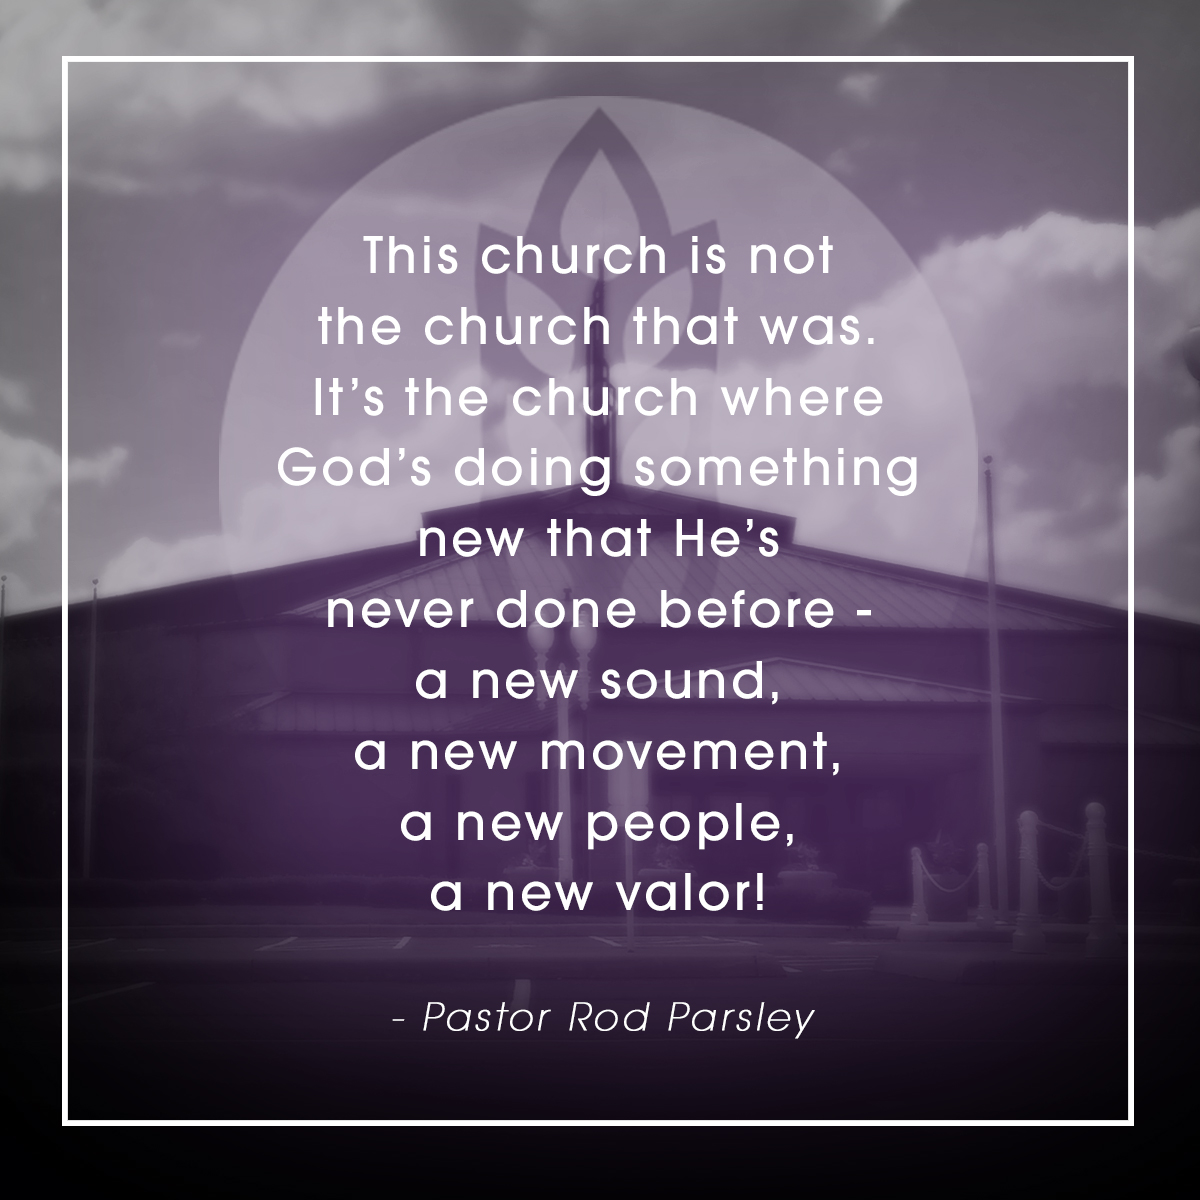 “This church is not the church that was. It’s the church where God’s doing something new that He’s never done before – a new sound, a new movement, a new people, a new Valor!” – Pastor Rod Parsley